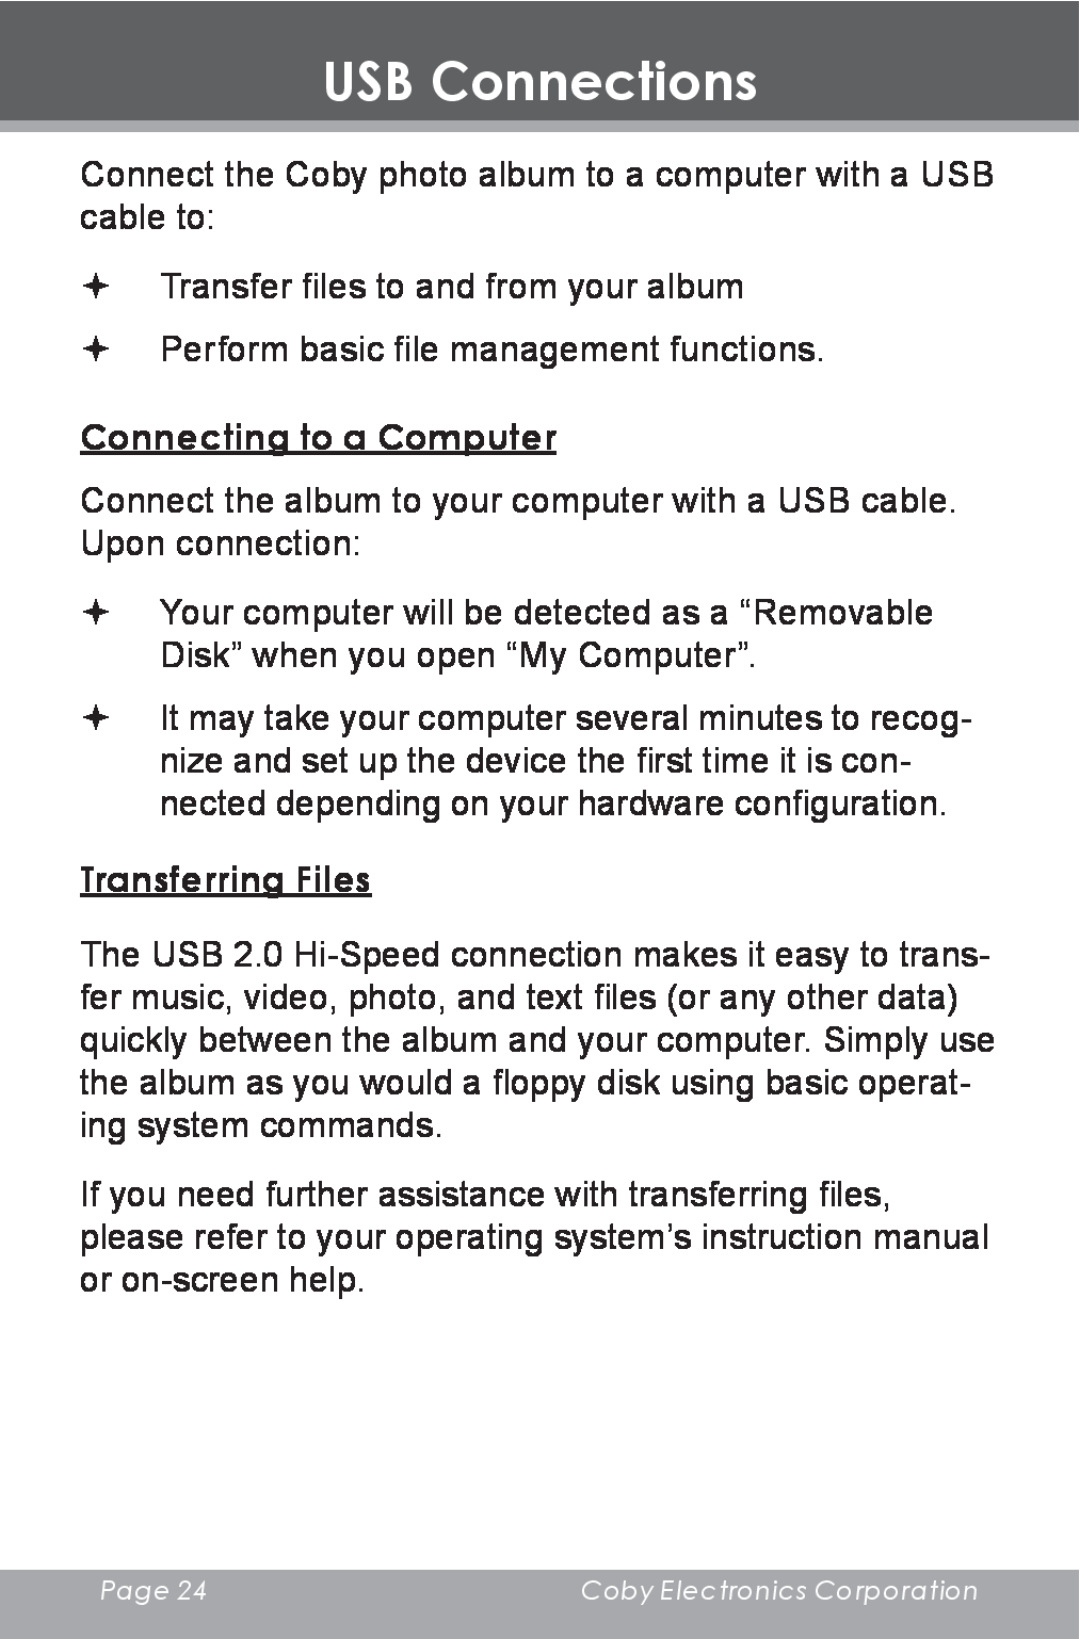 COBY electronic DP-240 instruction manual USB Connections, Connecting to a Computer, Transferring Files 